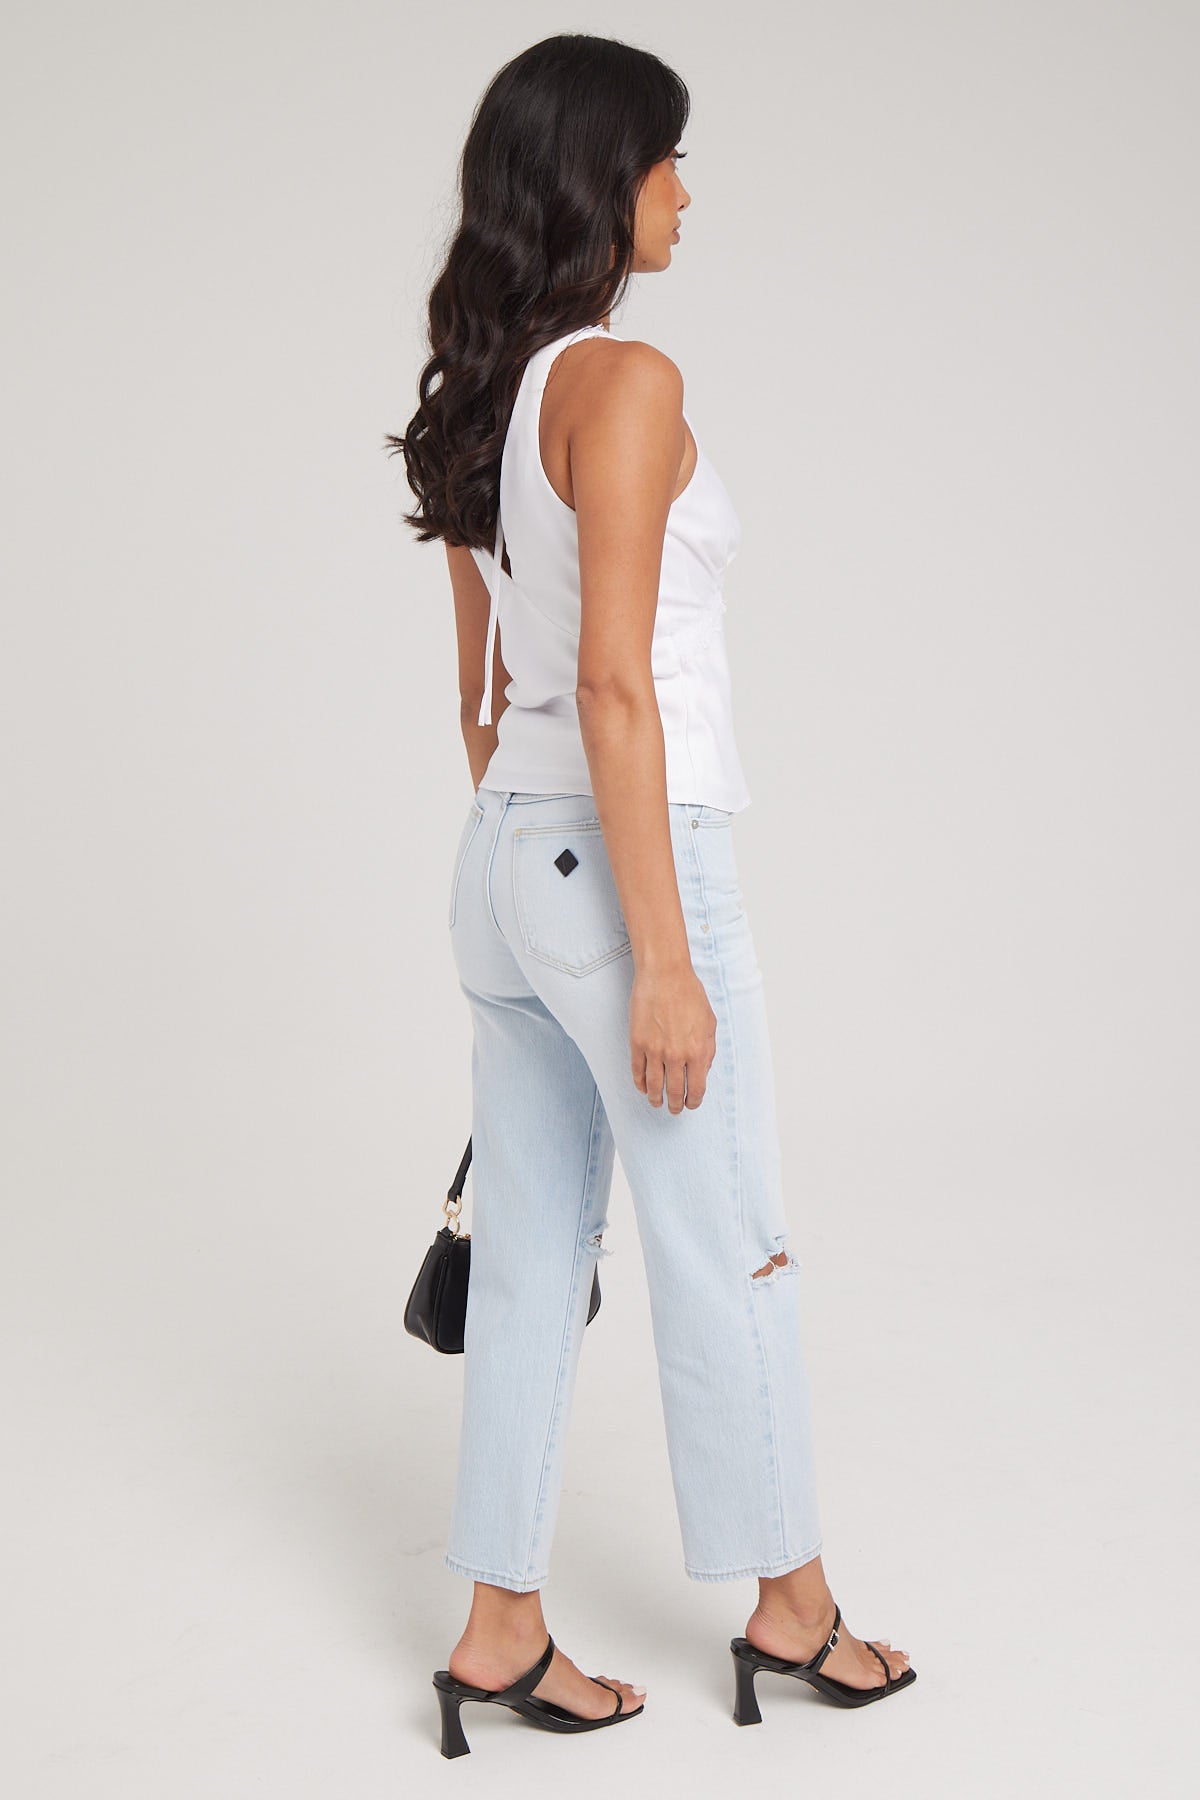 Abrand 95 Straight Crop Faye Jean Recycled Light Vintage Blue